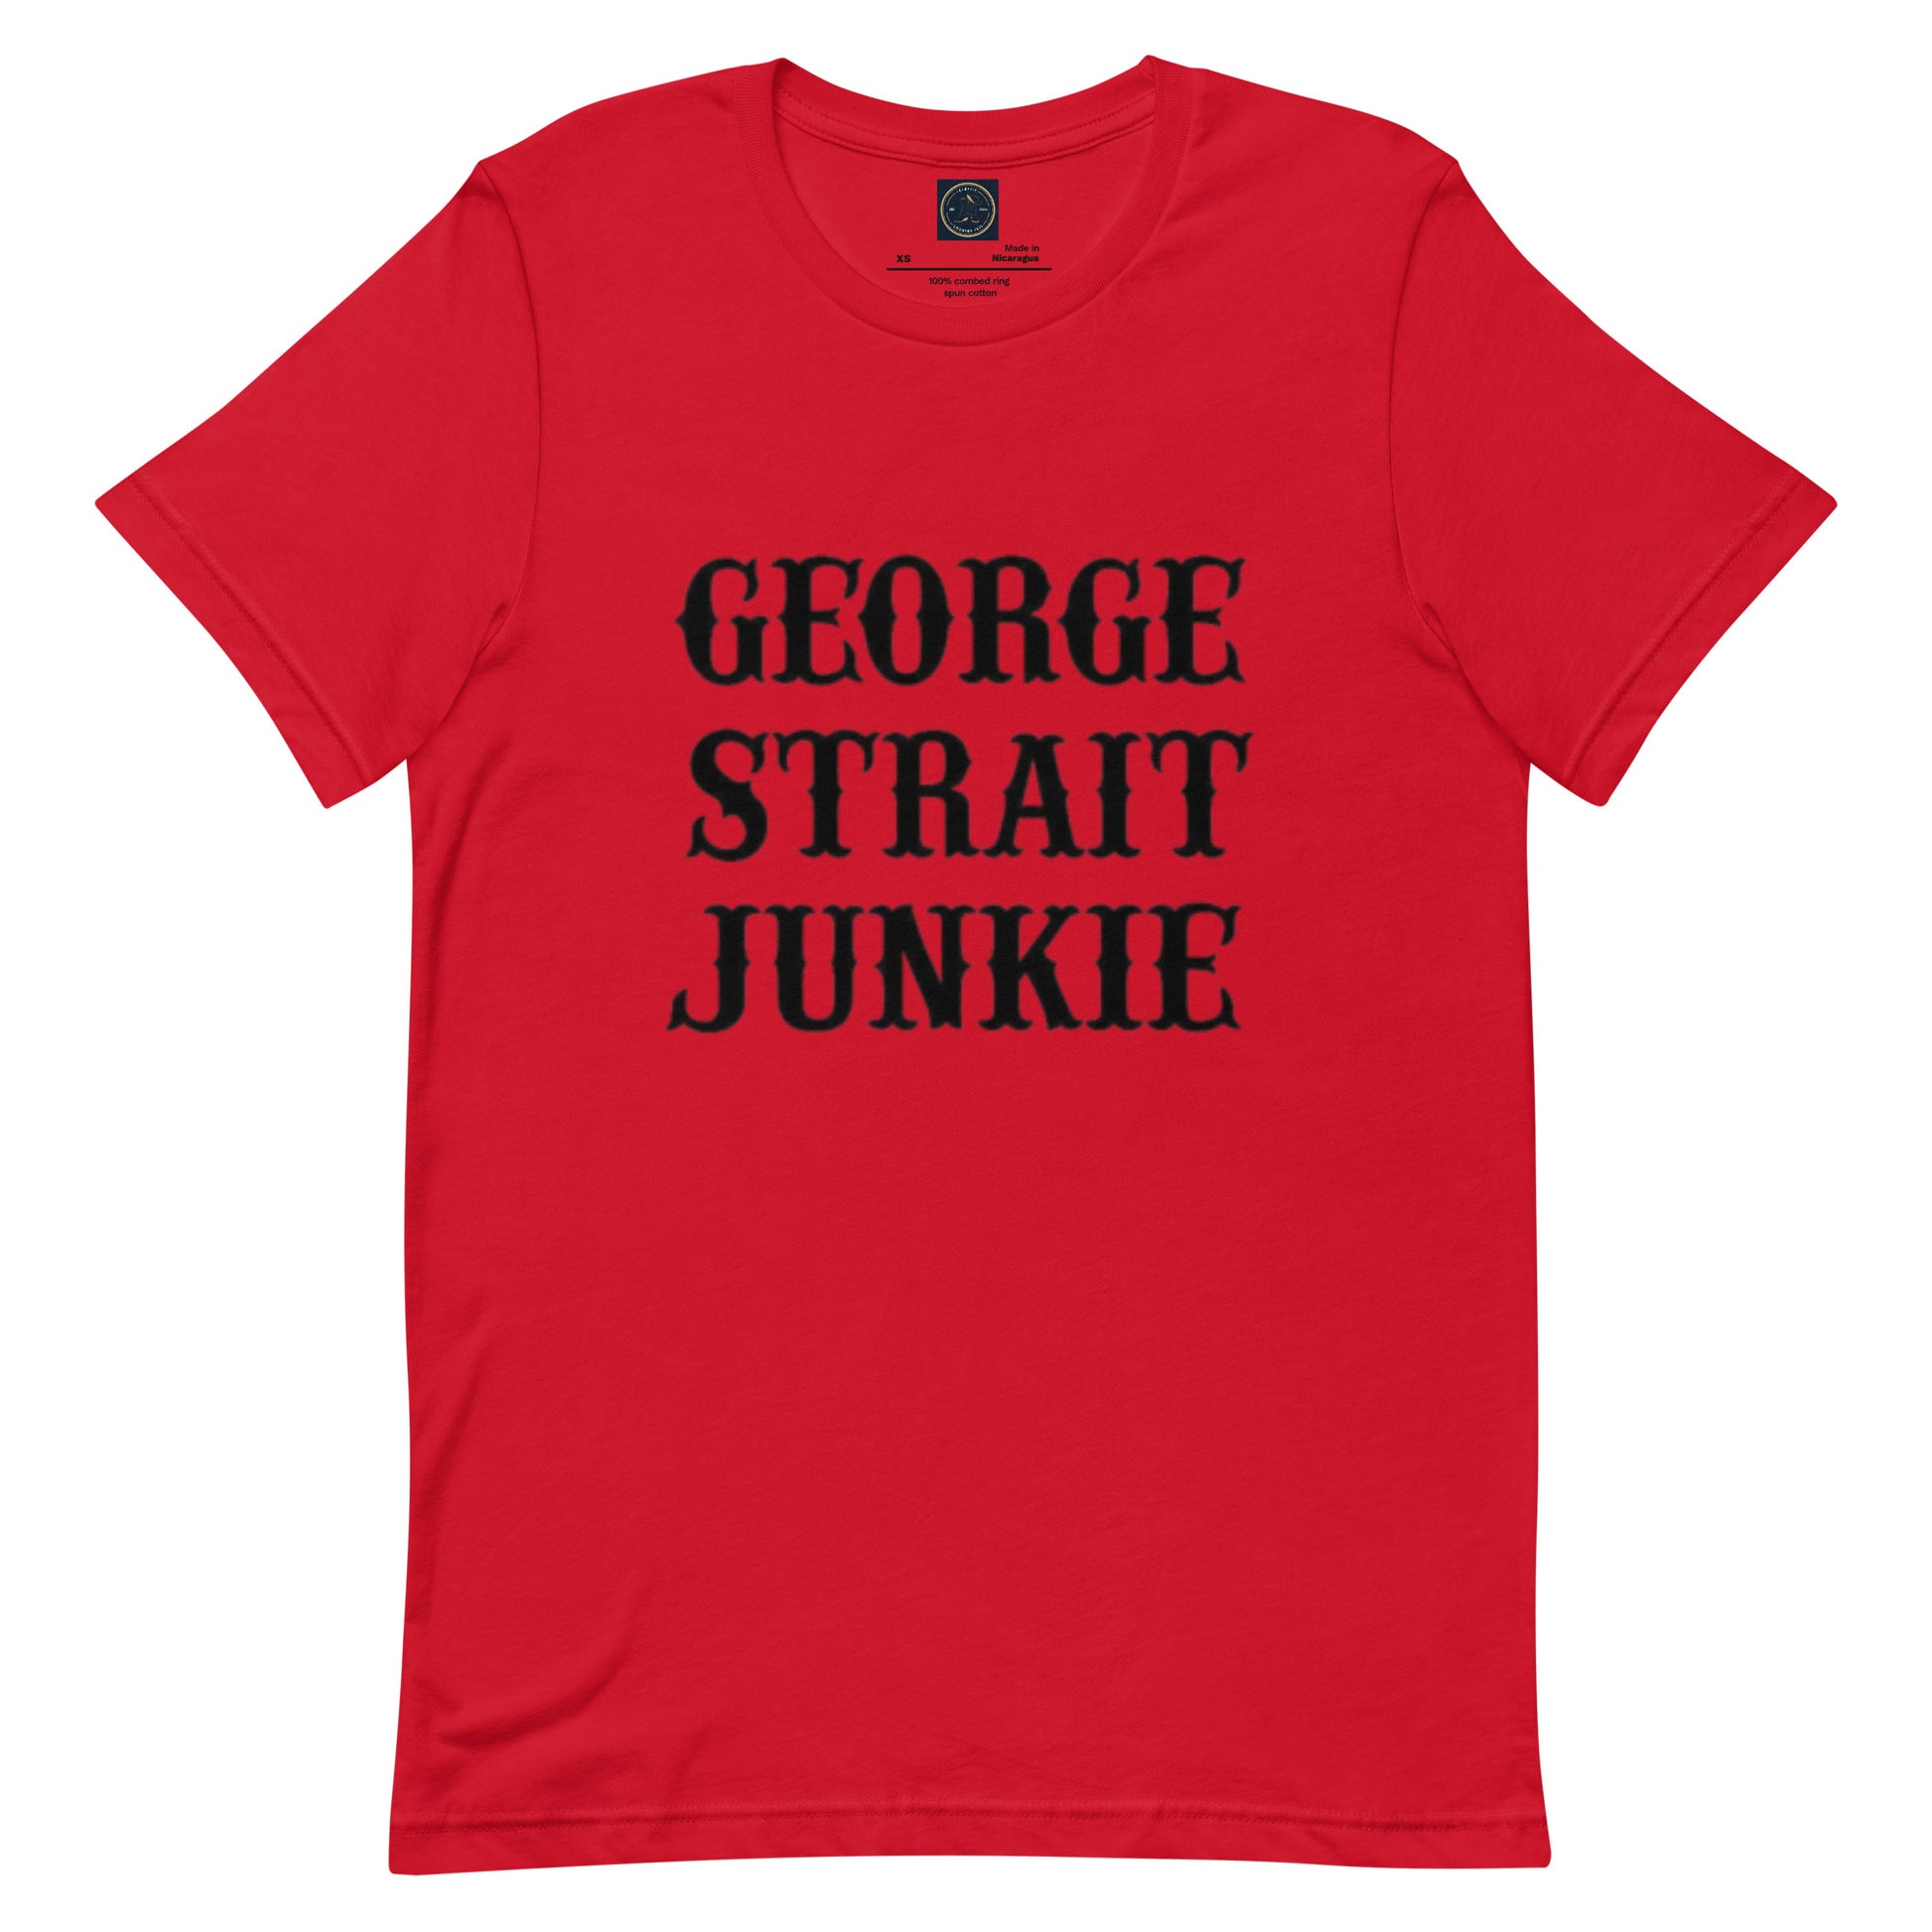 Junkie - Classic Country Tees